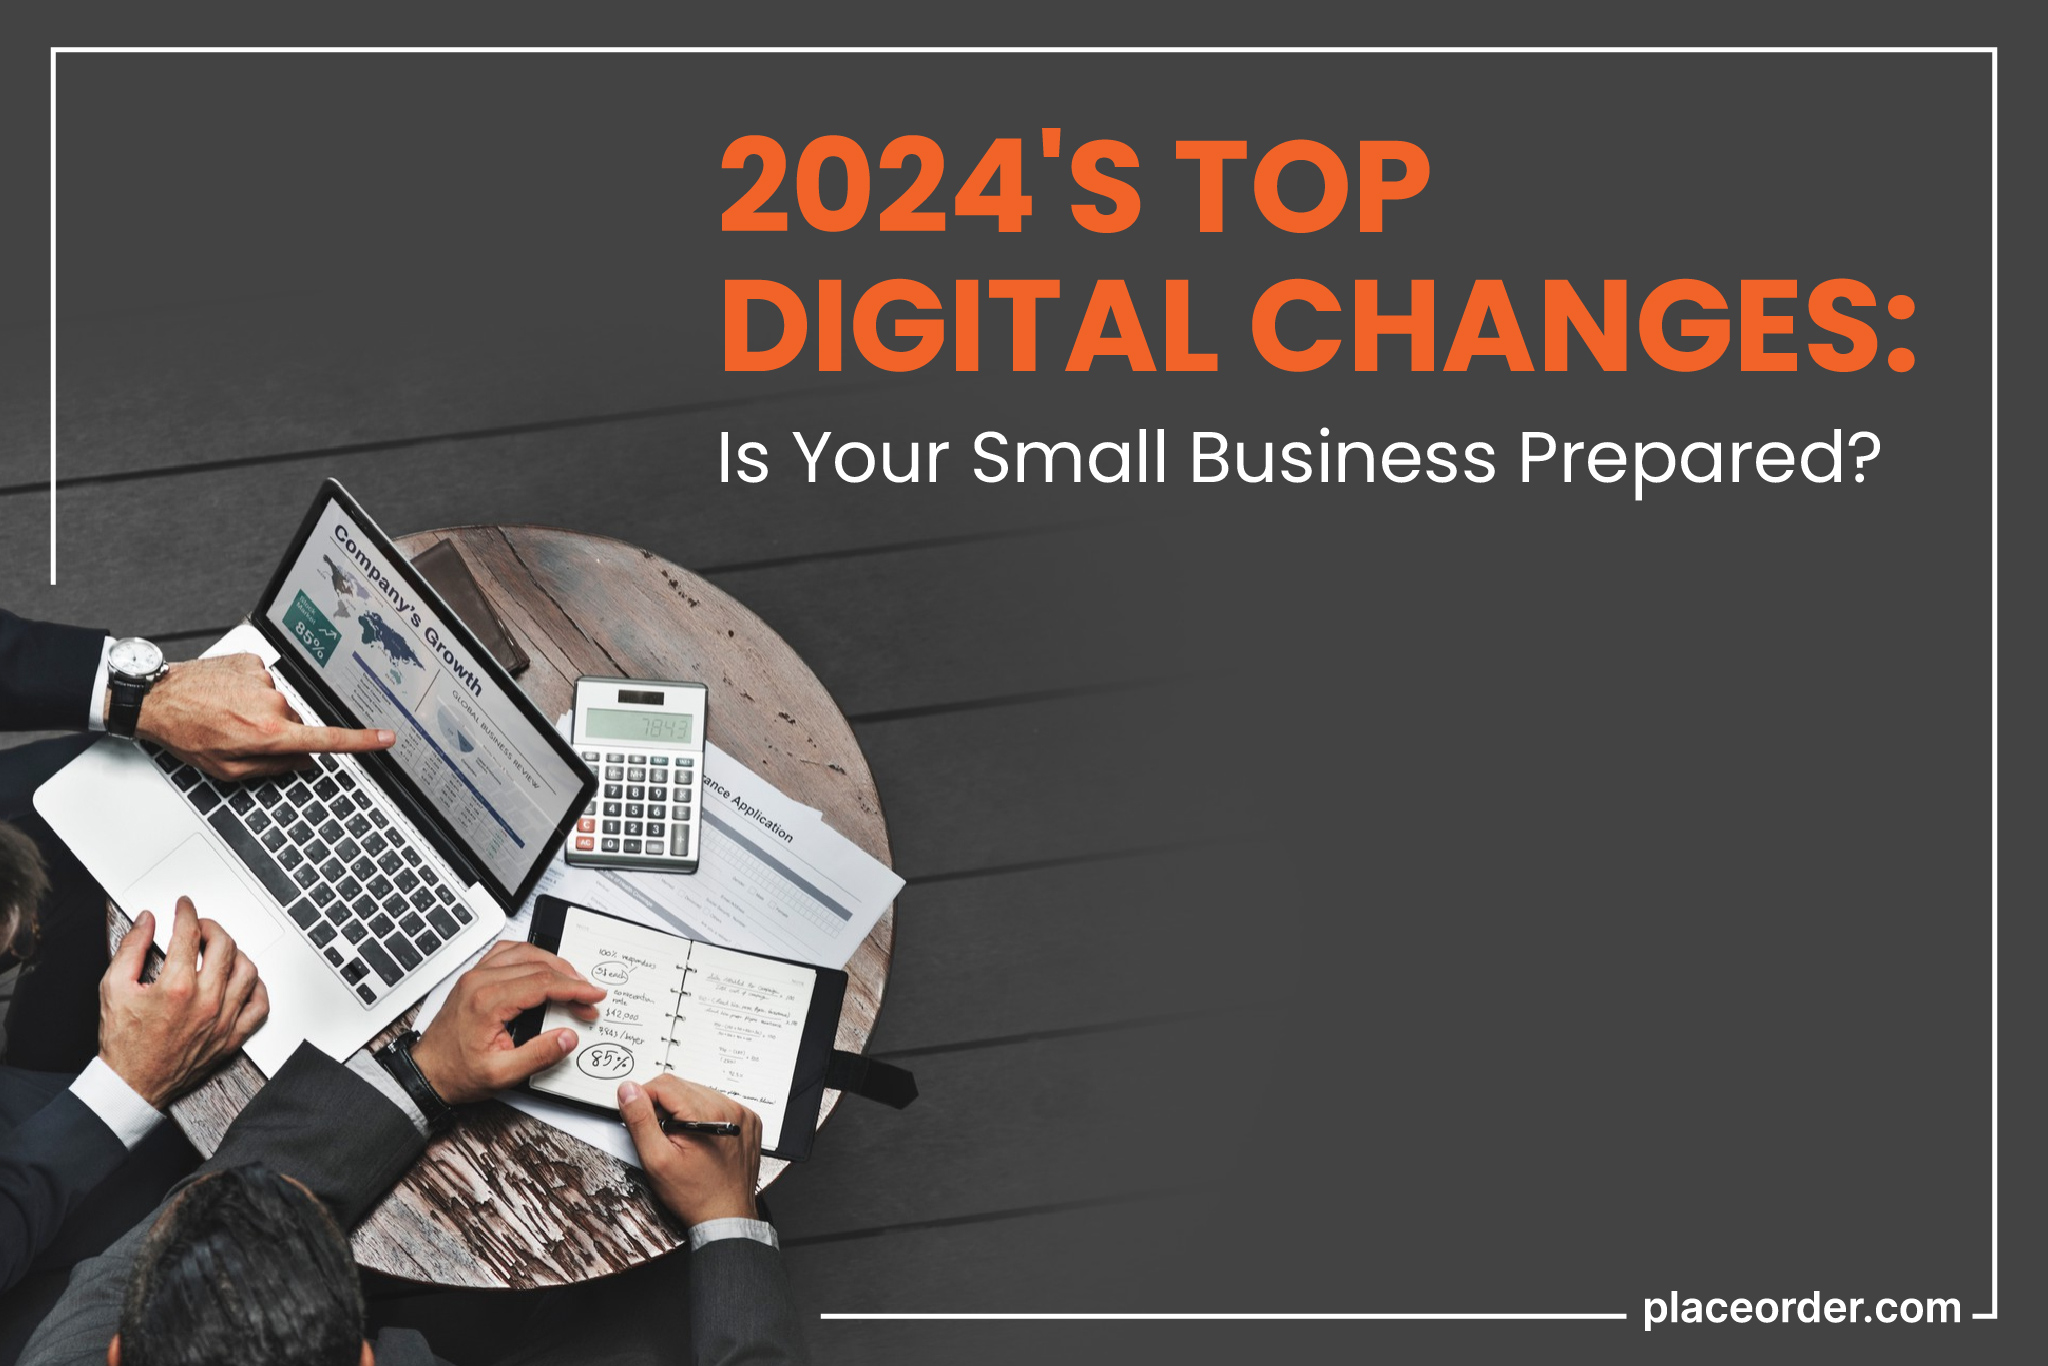 2024's Top Digital Changes: Is Your Small Business Prepared?